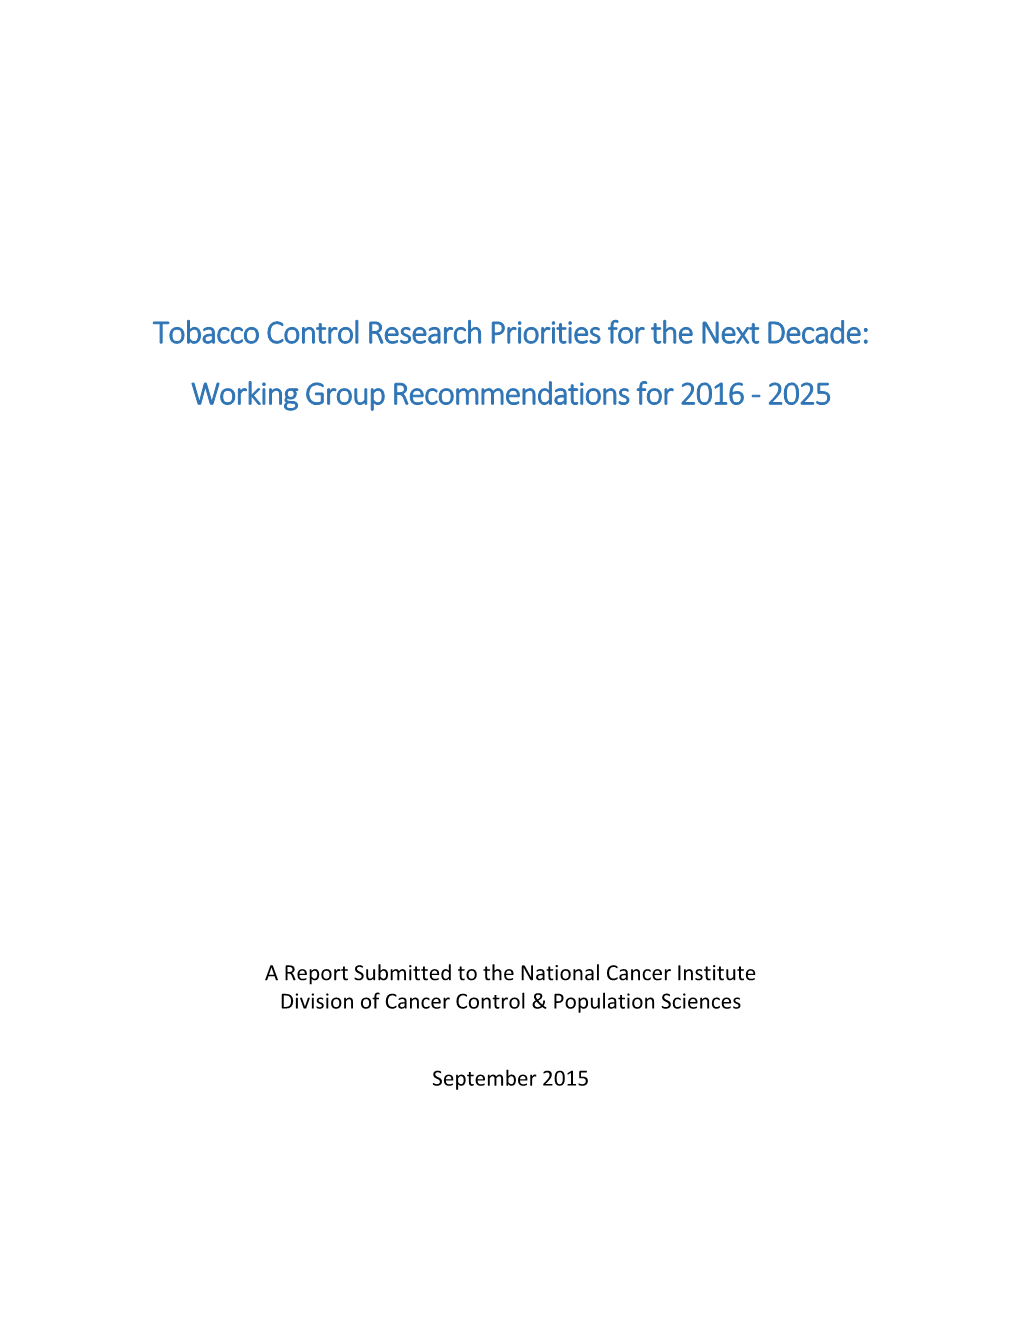 Tobacco Control Research Priorities for the Next Decade: Working